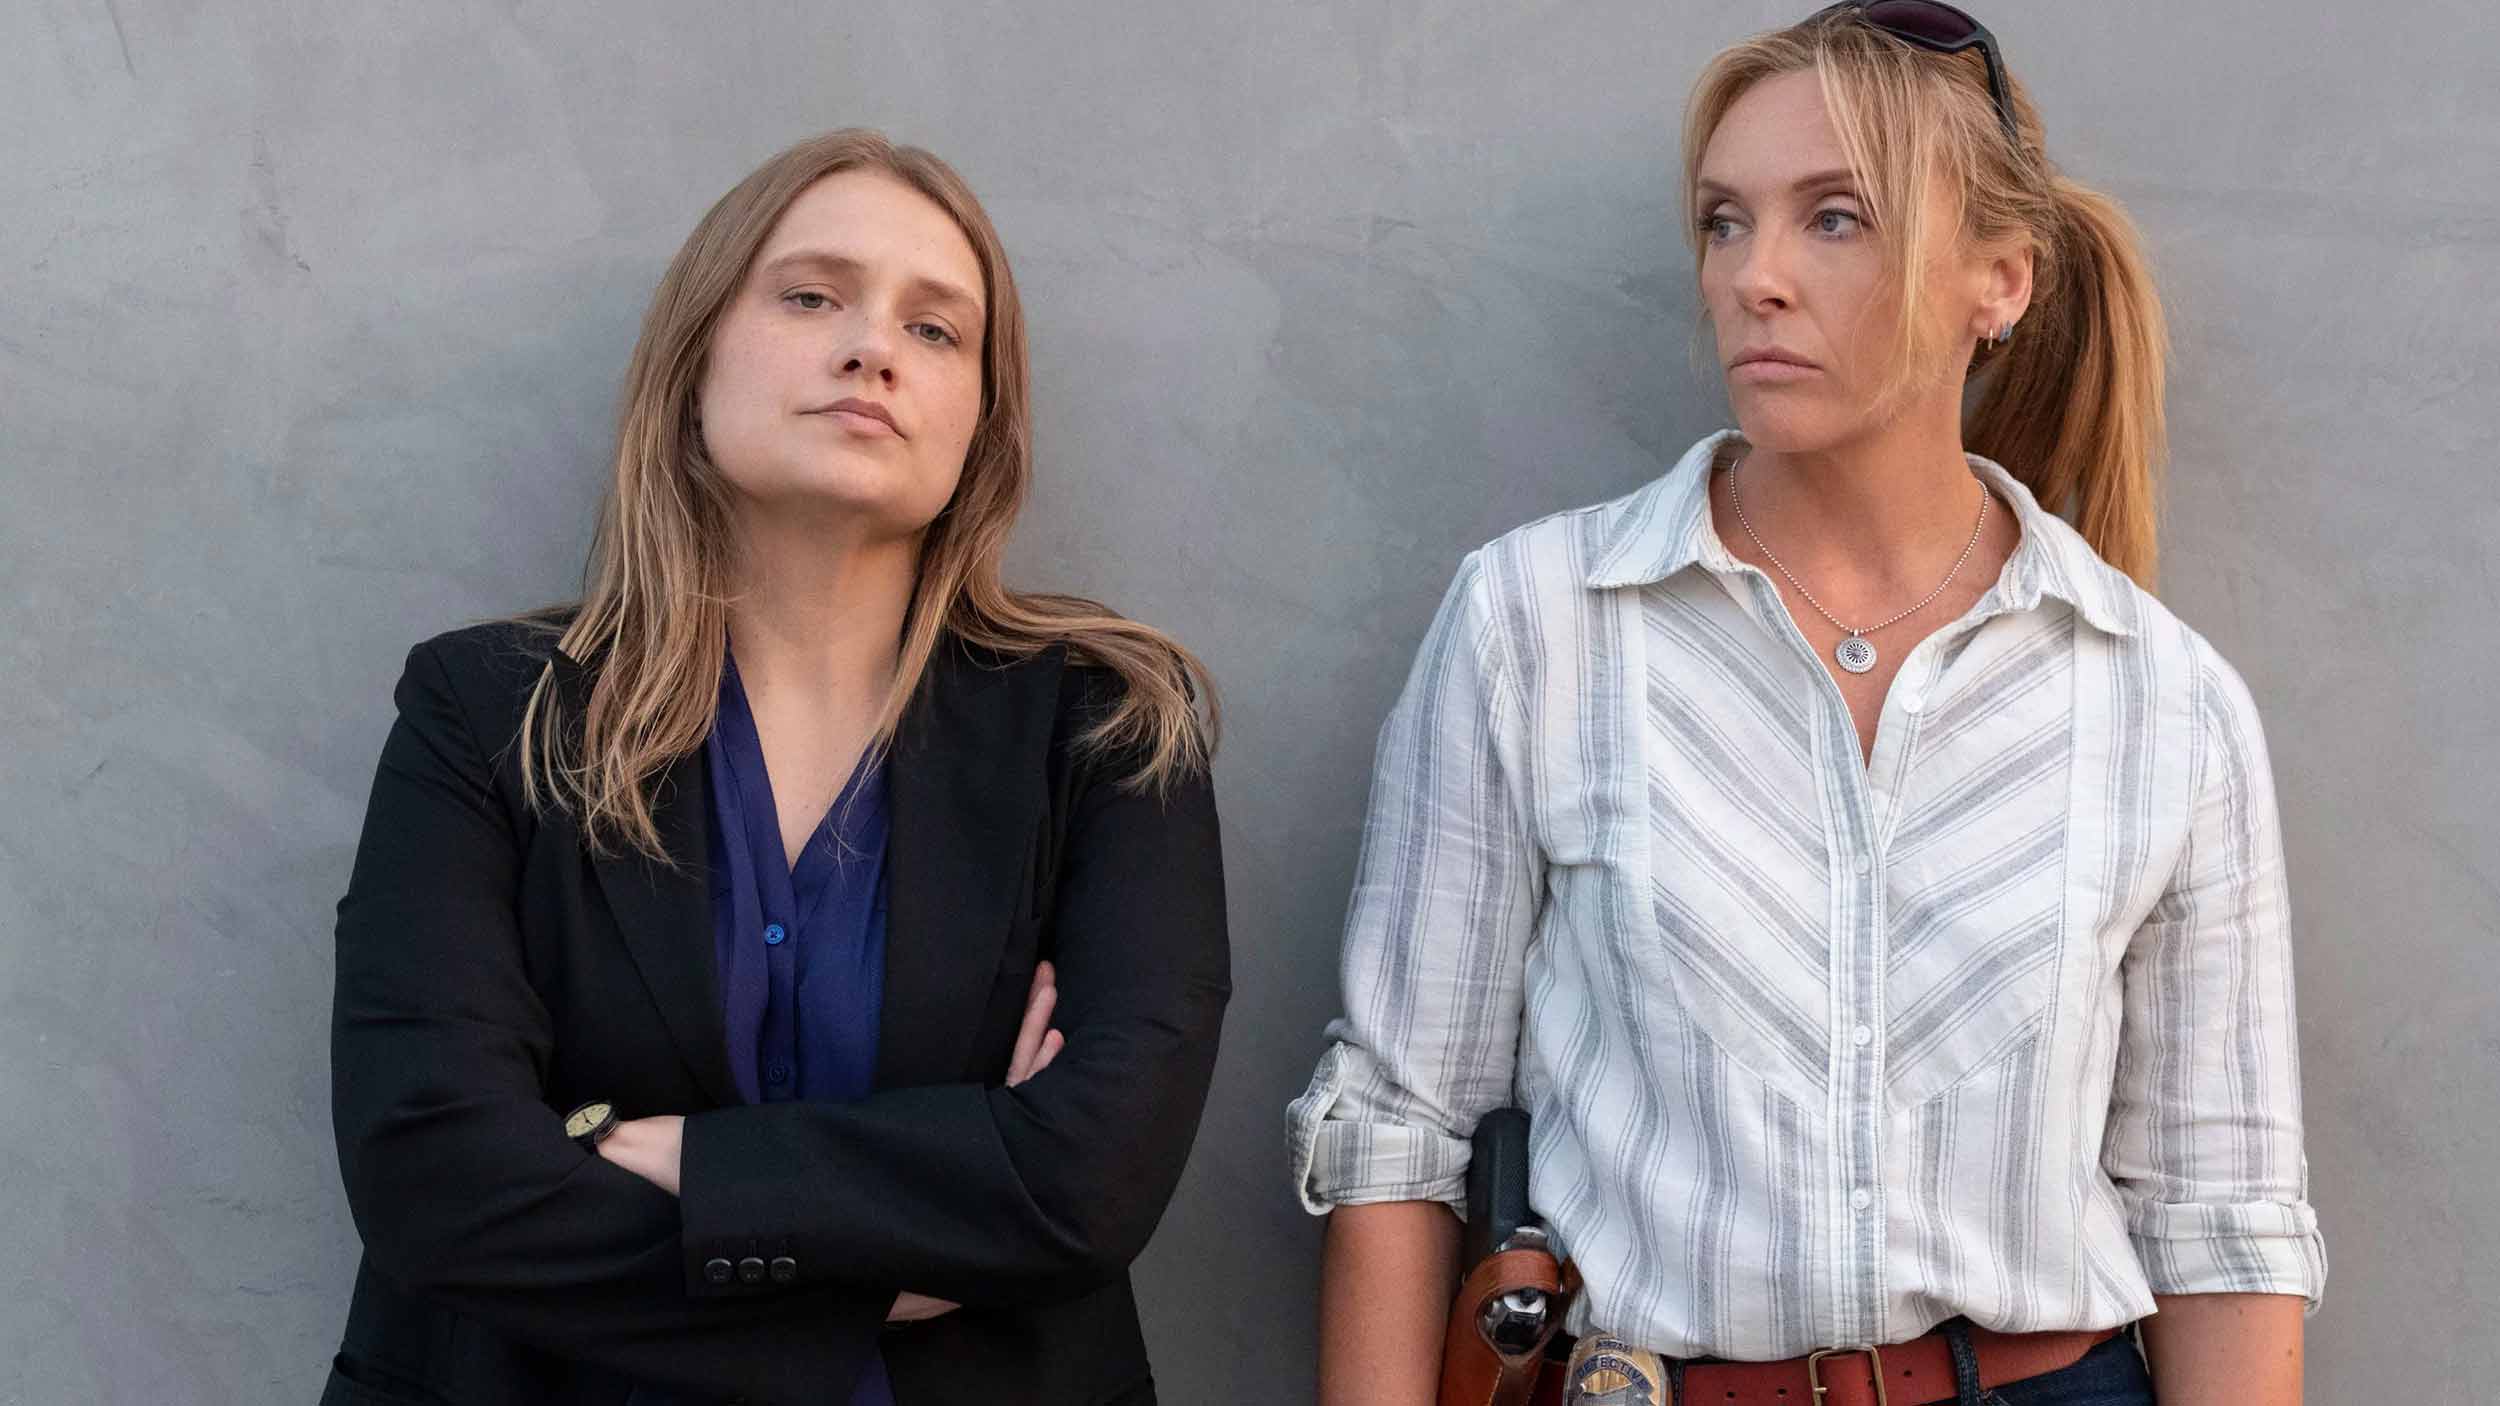 Merrit Wever (left) and Toni Collette in <i>Unbelievable</i>.” width=”2500″ height=”1406″ srcset=”<a href=